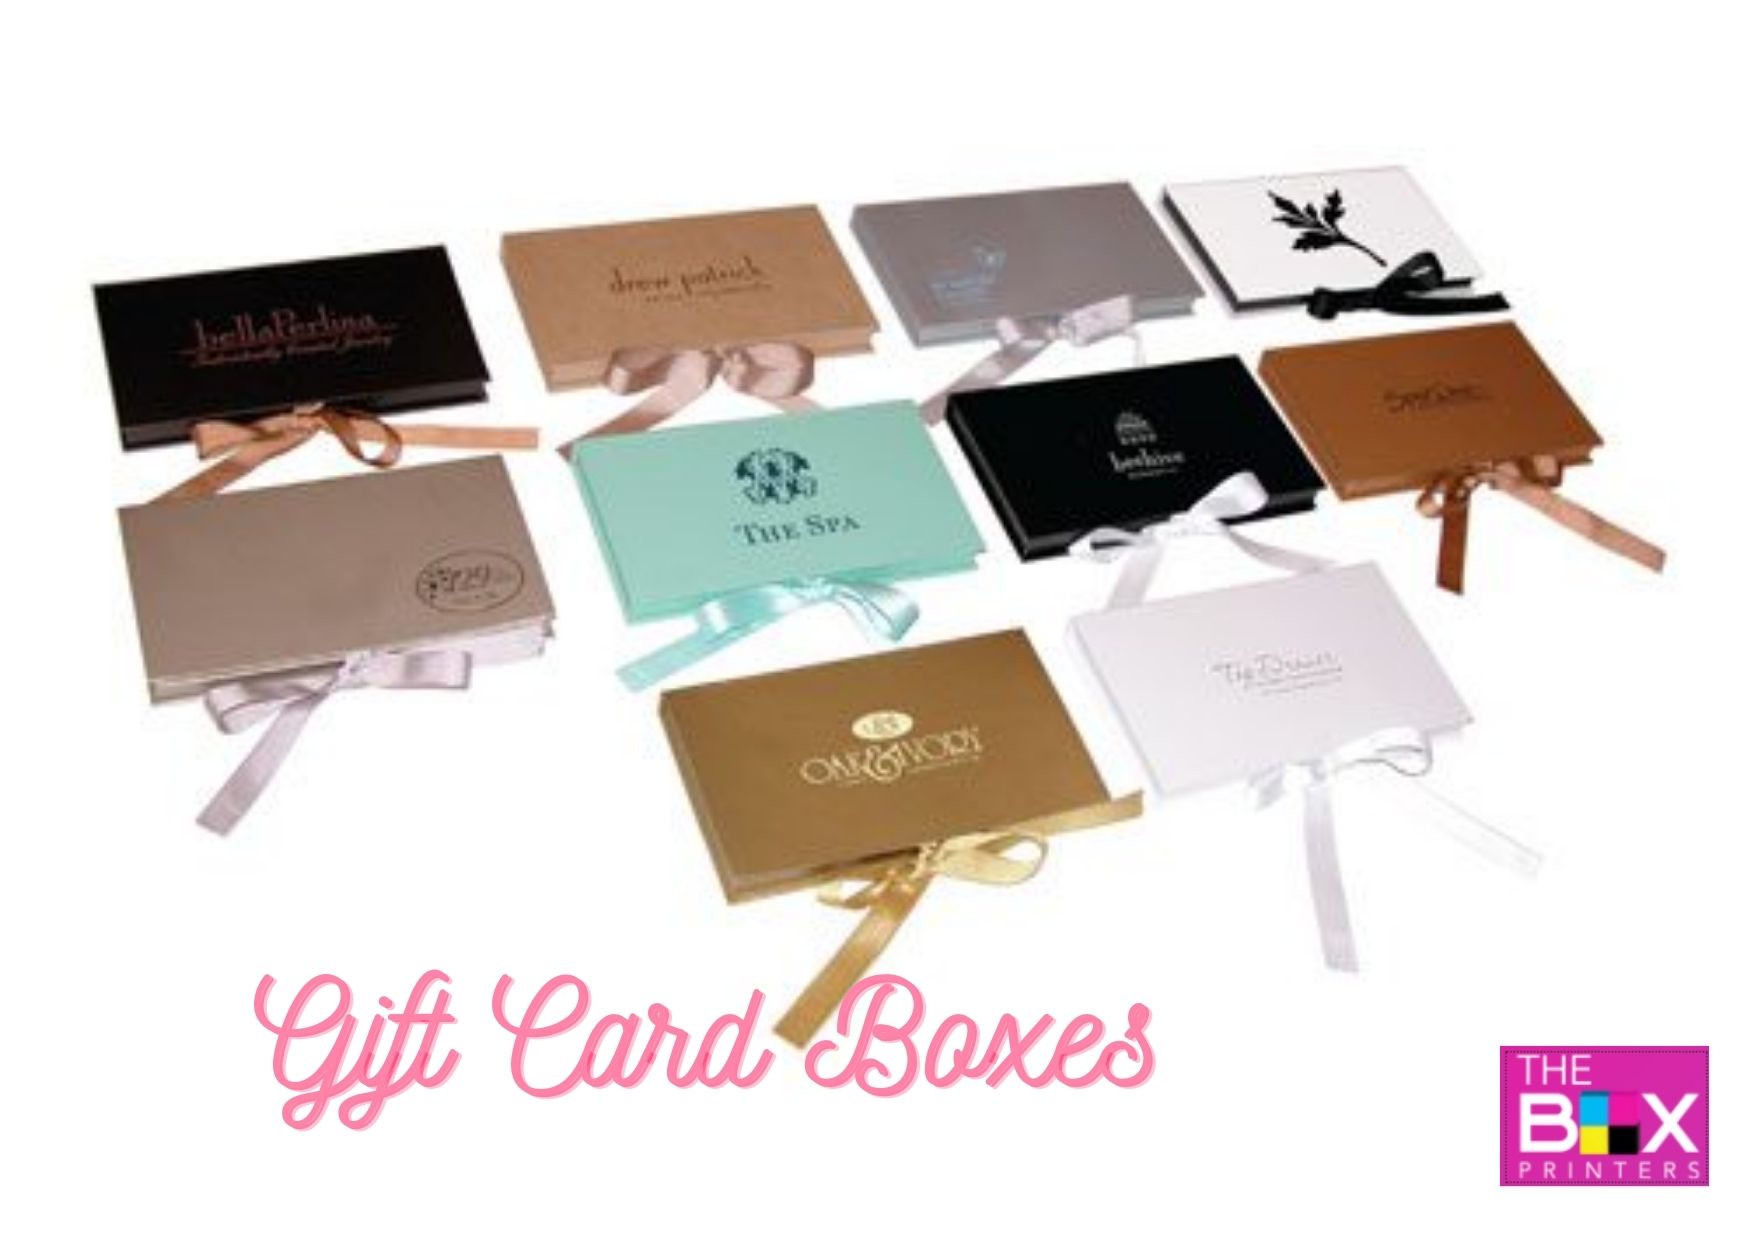 Everything you need to know about the custom gift card boxes